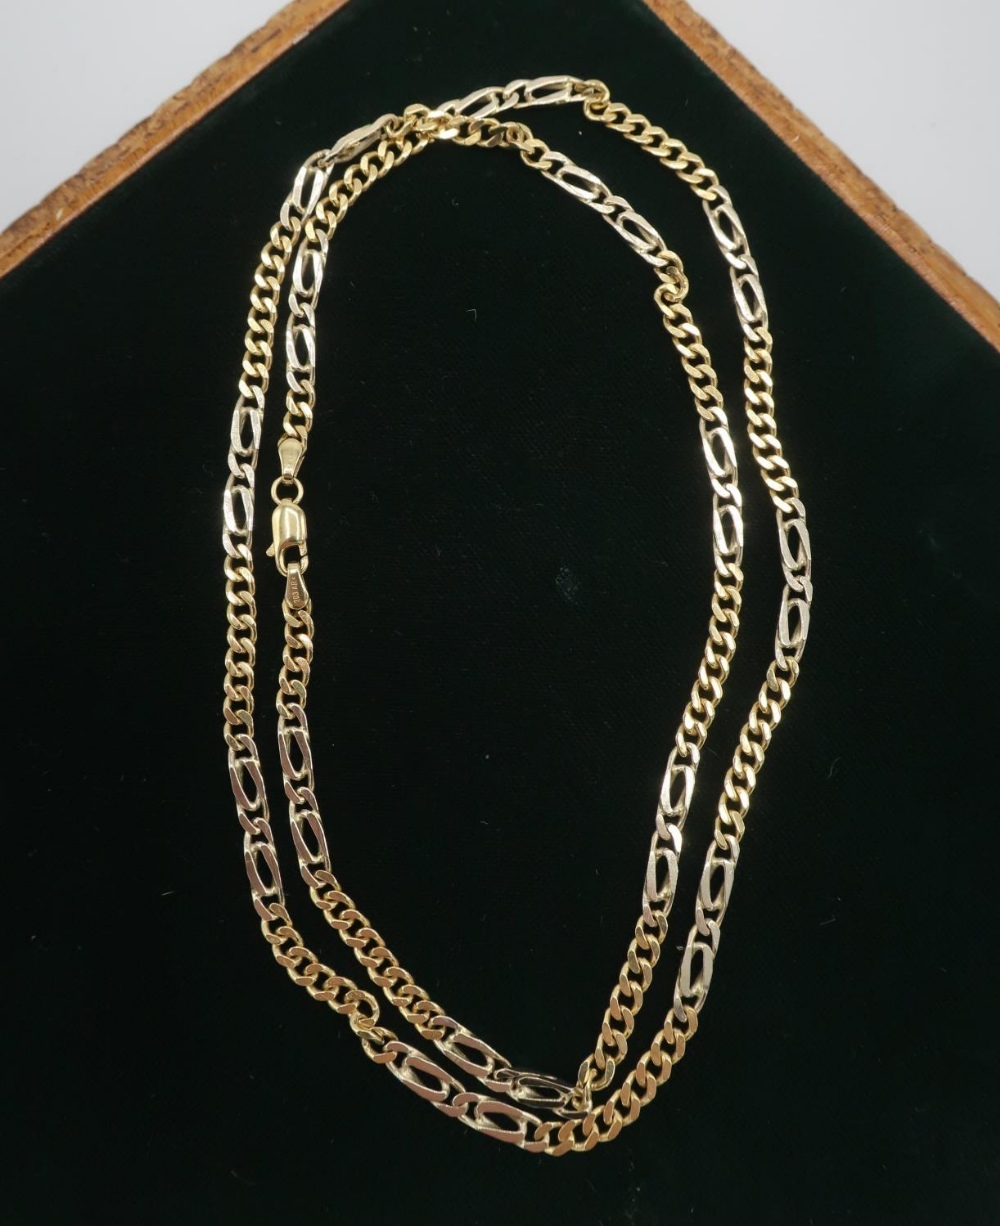 Gold flattened curb link necklace stamped 750, 59cm, 22.6g - Image 2 of 2